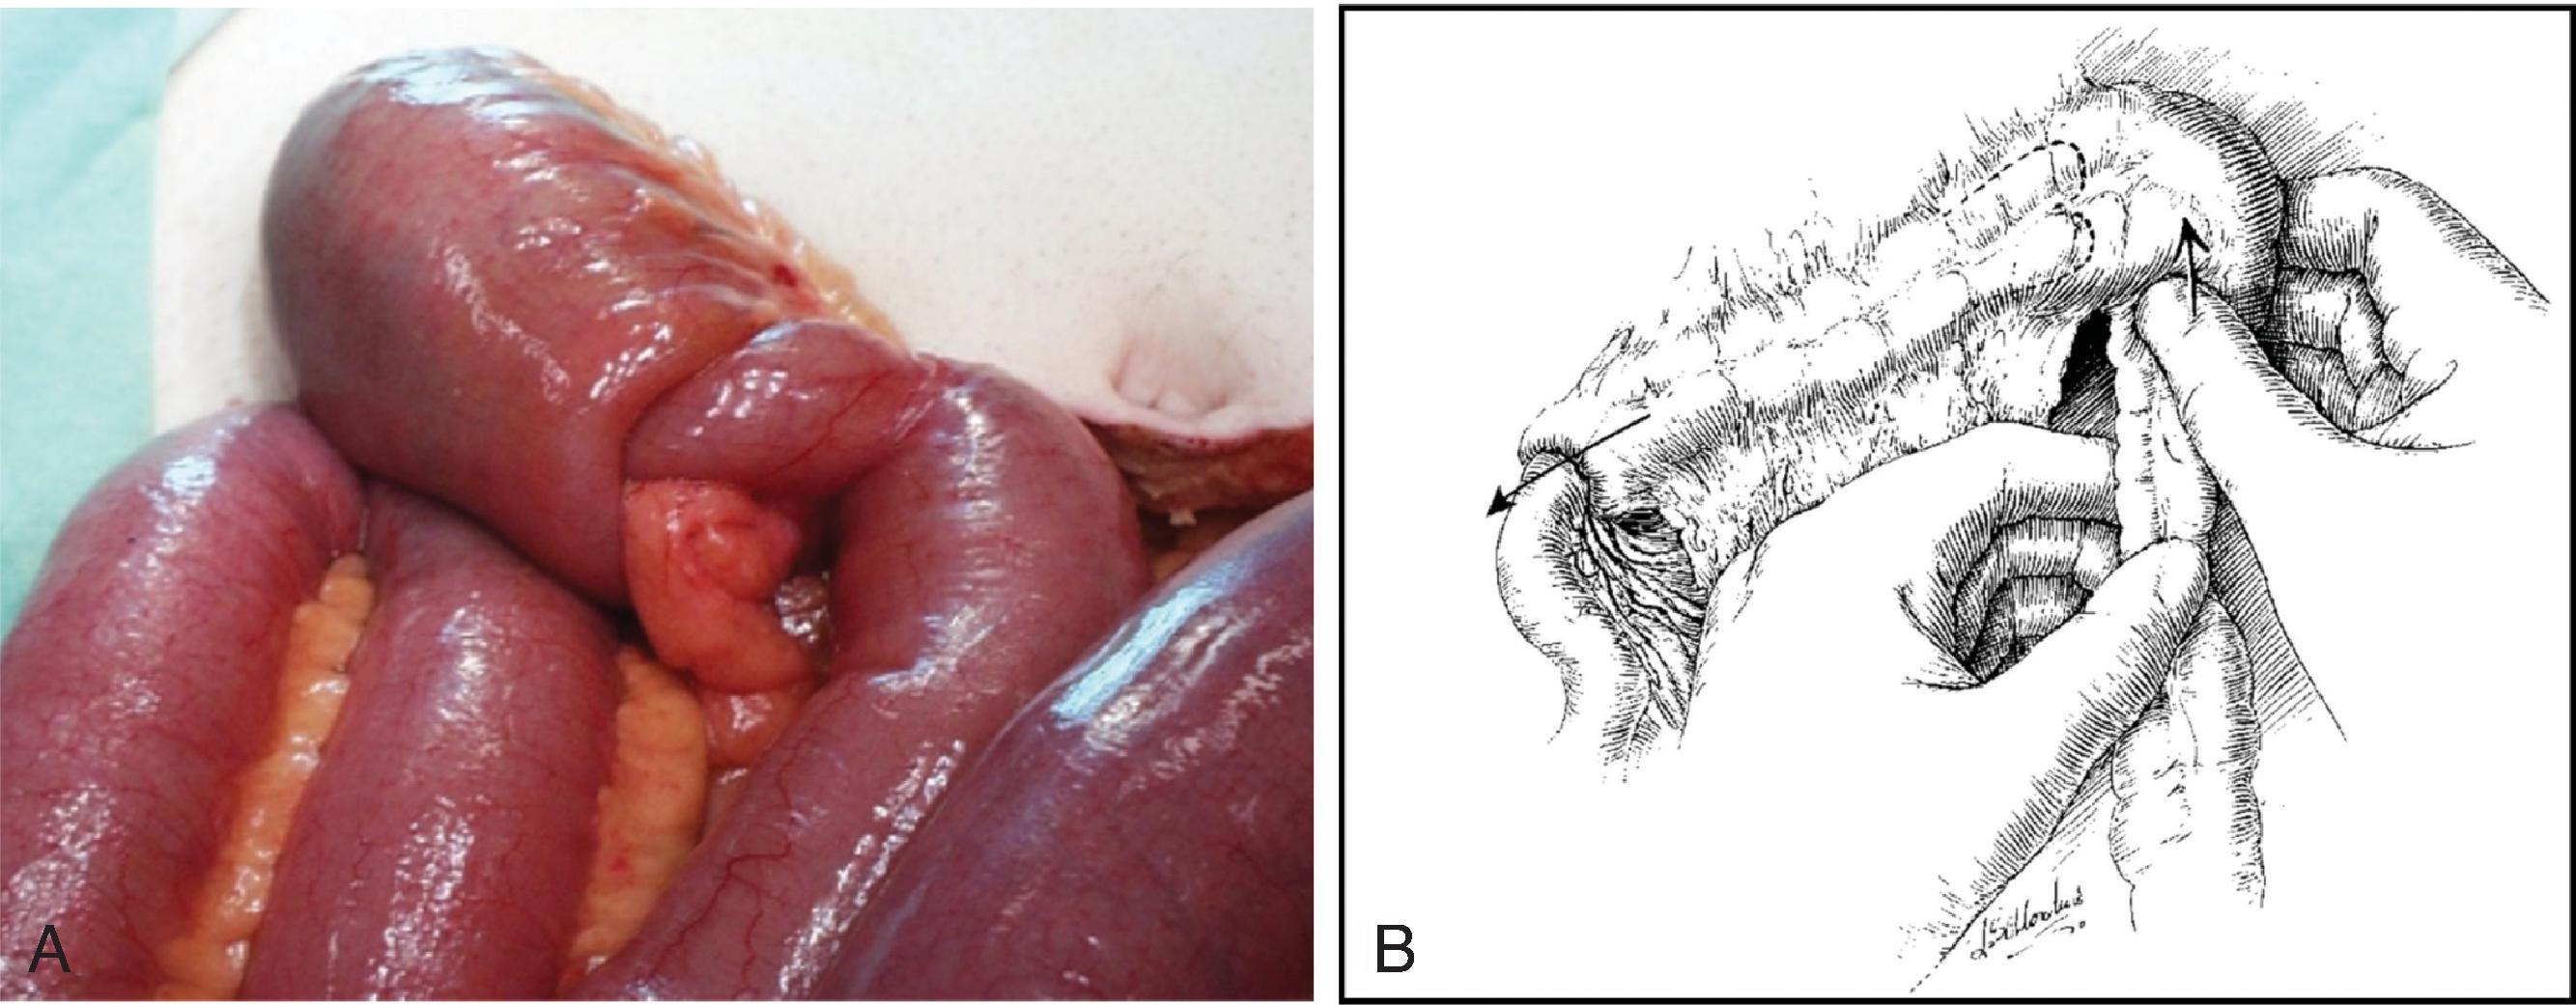 FIG. 7, Ileocolic intussusception as viewed by laparotomy (A) with schematic depiction (B) demonstrating technique used for successful reduction.